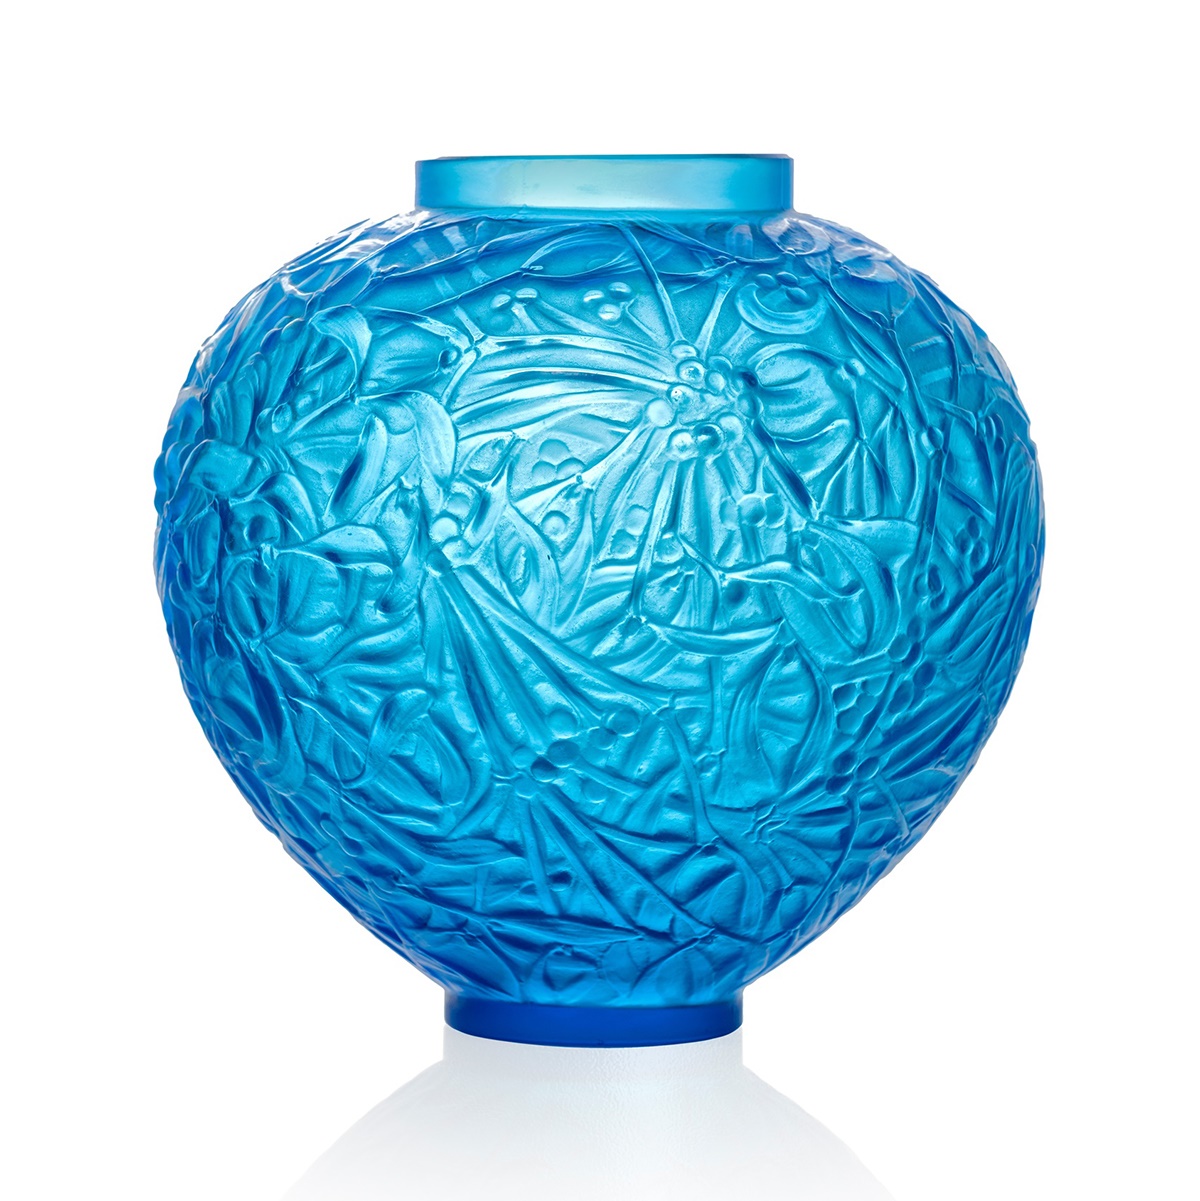 RENÉ LALIQUE (FRENCH 1860-1945) | GUI VASE, NO. 948 | Sold for £6,300*